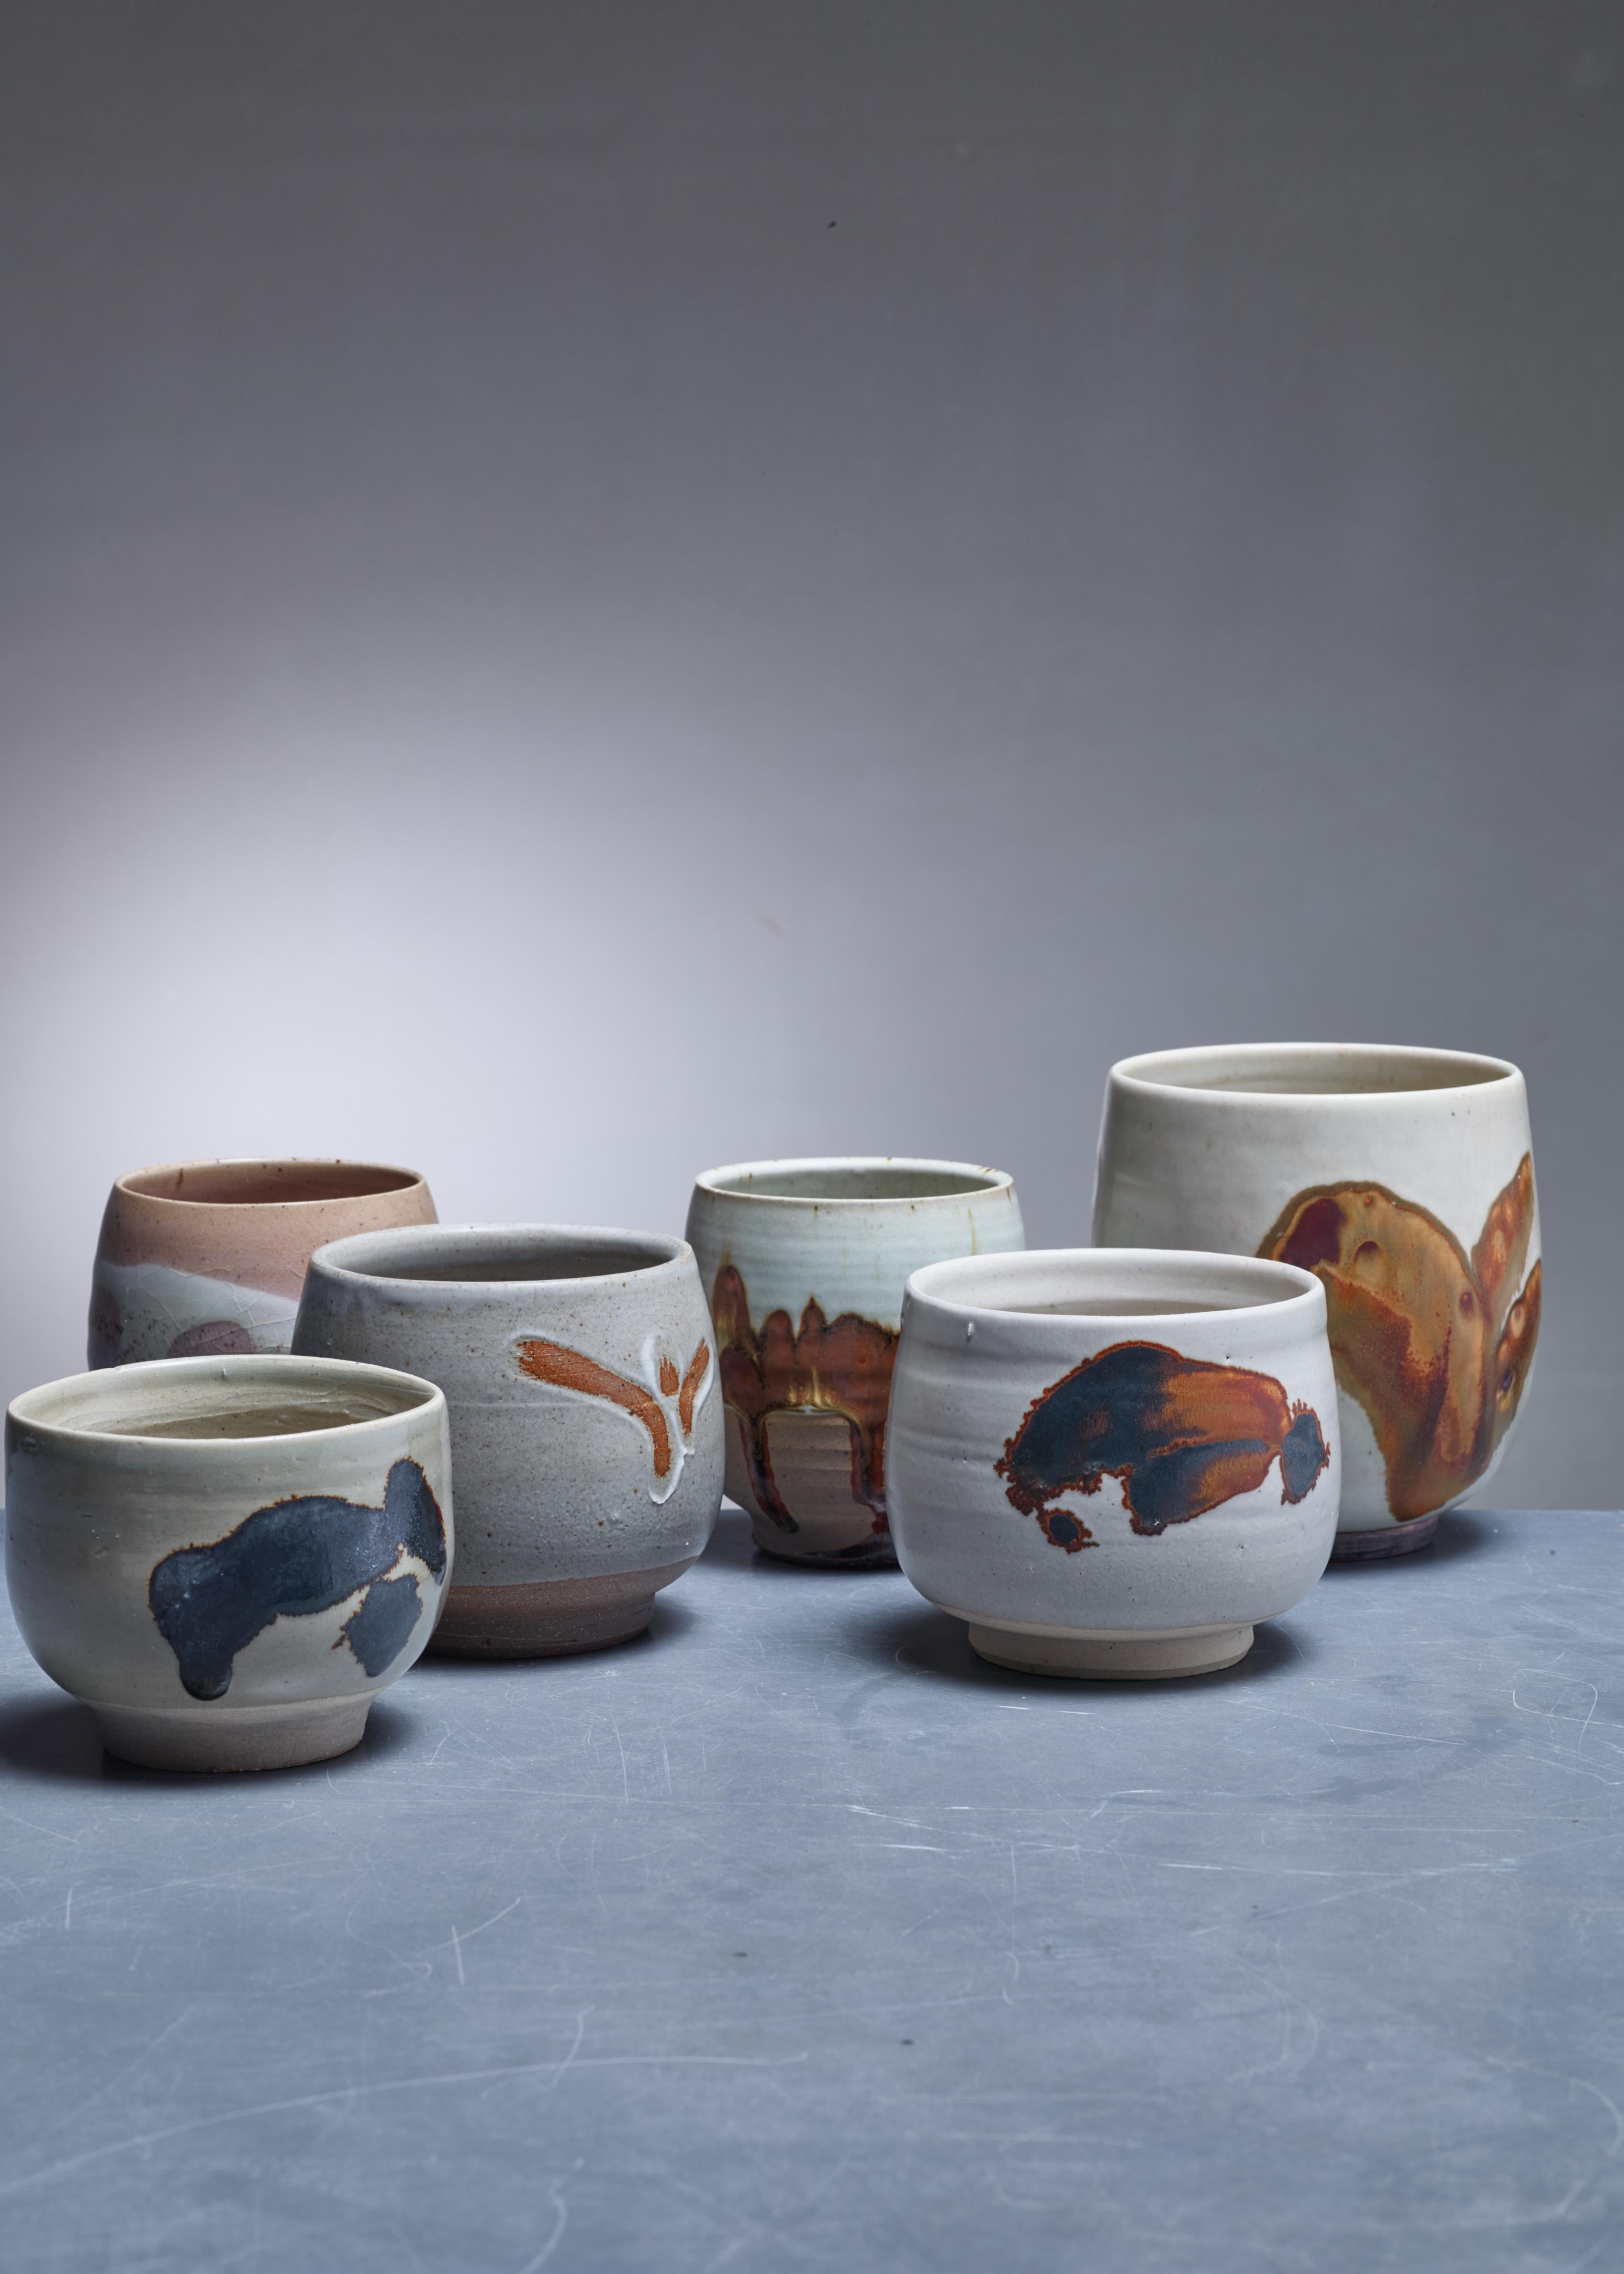 A set of six ceramic vases with an earth-tone glaze finish and abstract figures, by Rolf Palm.

The pieces are signed by Palm, some with the year of production. Measures: The shortest vase is 8.5 cm (3.3 inch) high with a 10.5 cm (4 inch)